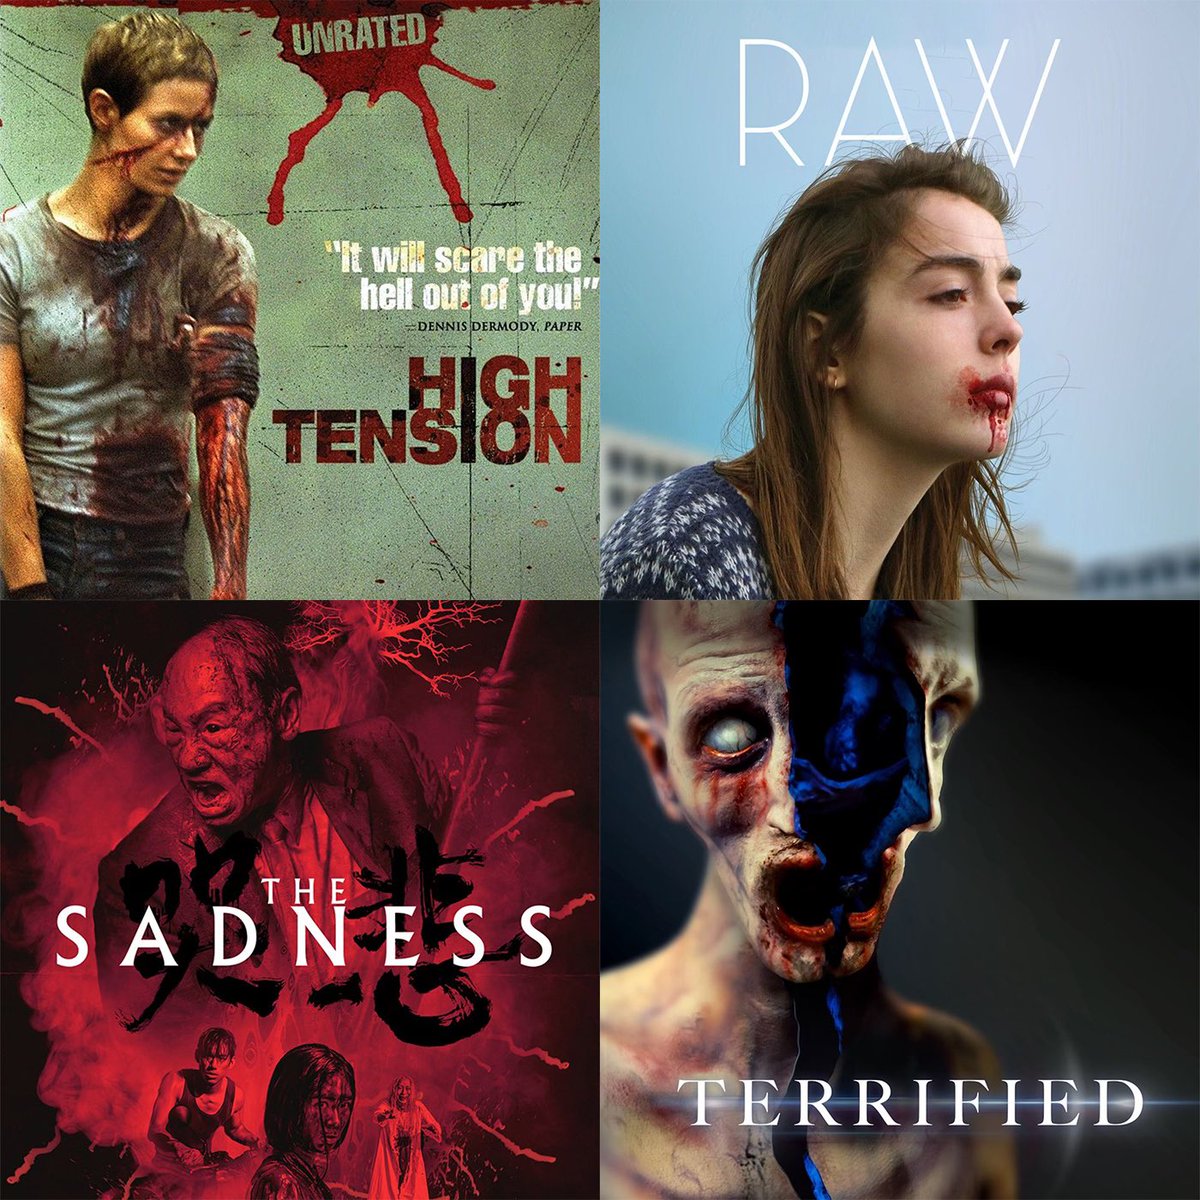 We’ve just unleashed the FINAL FOUR contenders for March’s Listener Request! This month is all about Foreign horror films that will scare Todd. Here are the top 4 movies suggested.  Vote now...while you still have a chance!!! Vote now: Patreon.com/Horrorvirgin